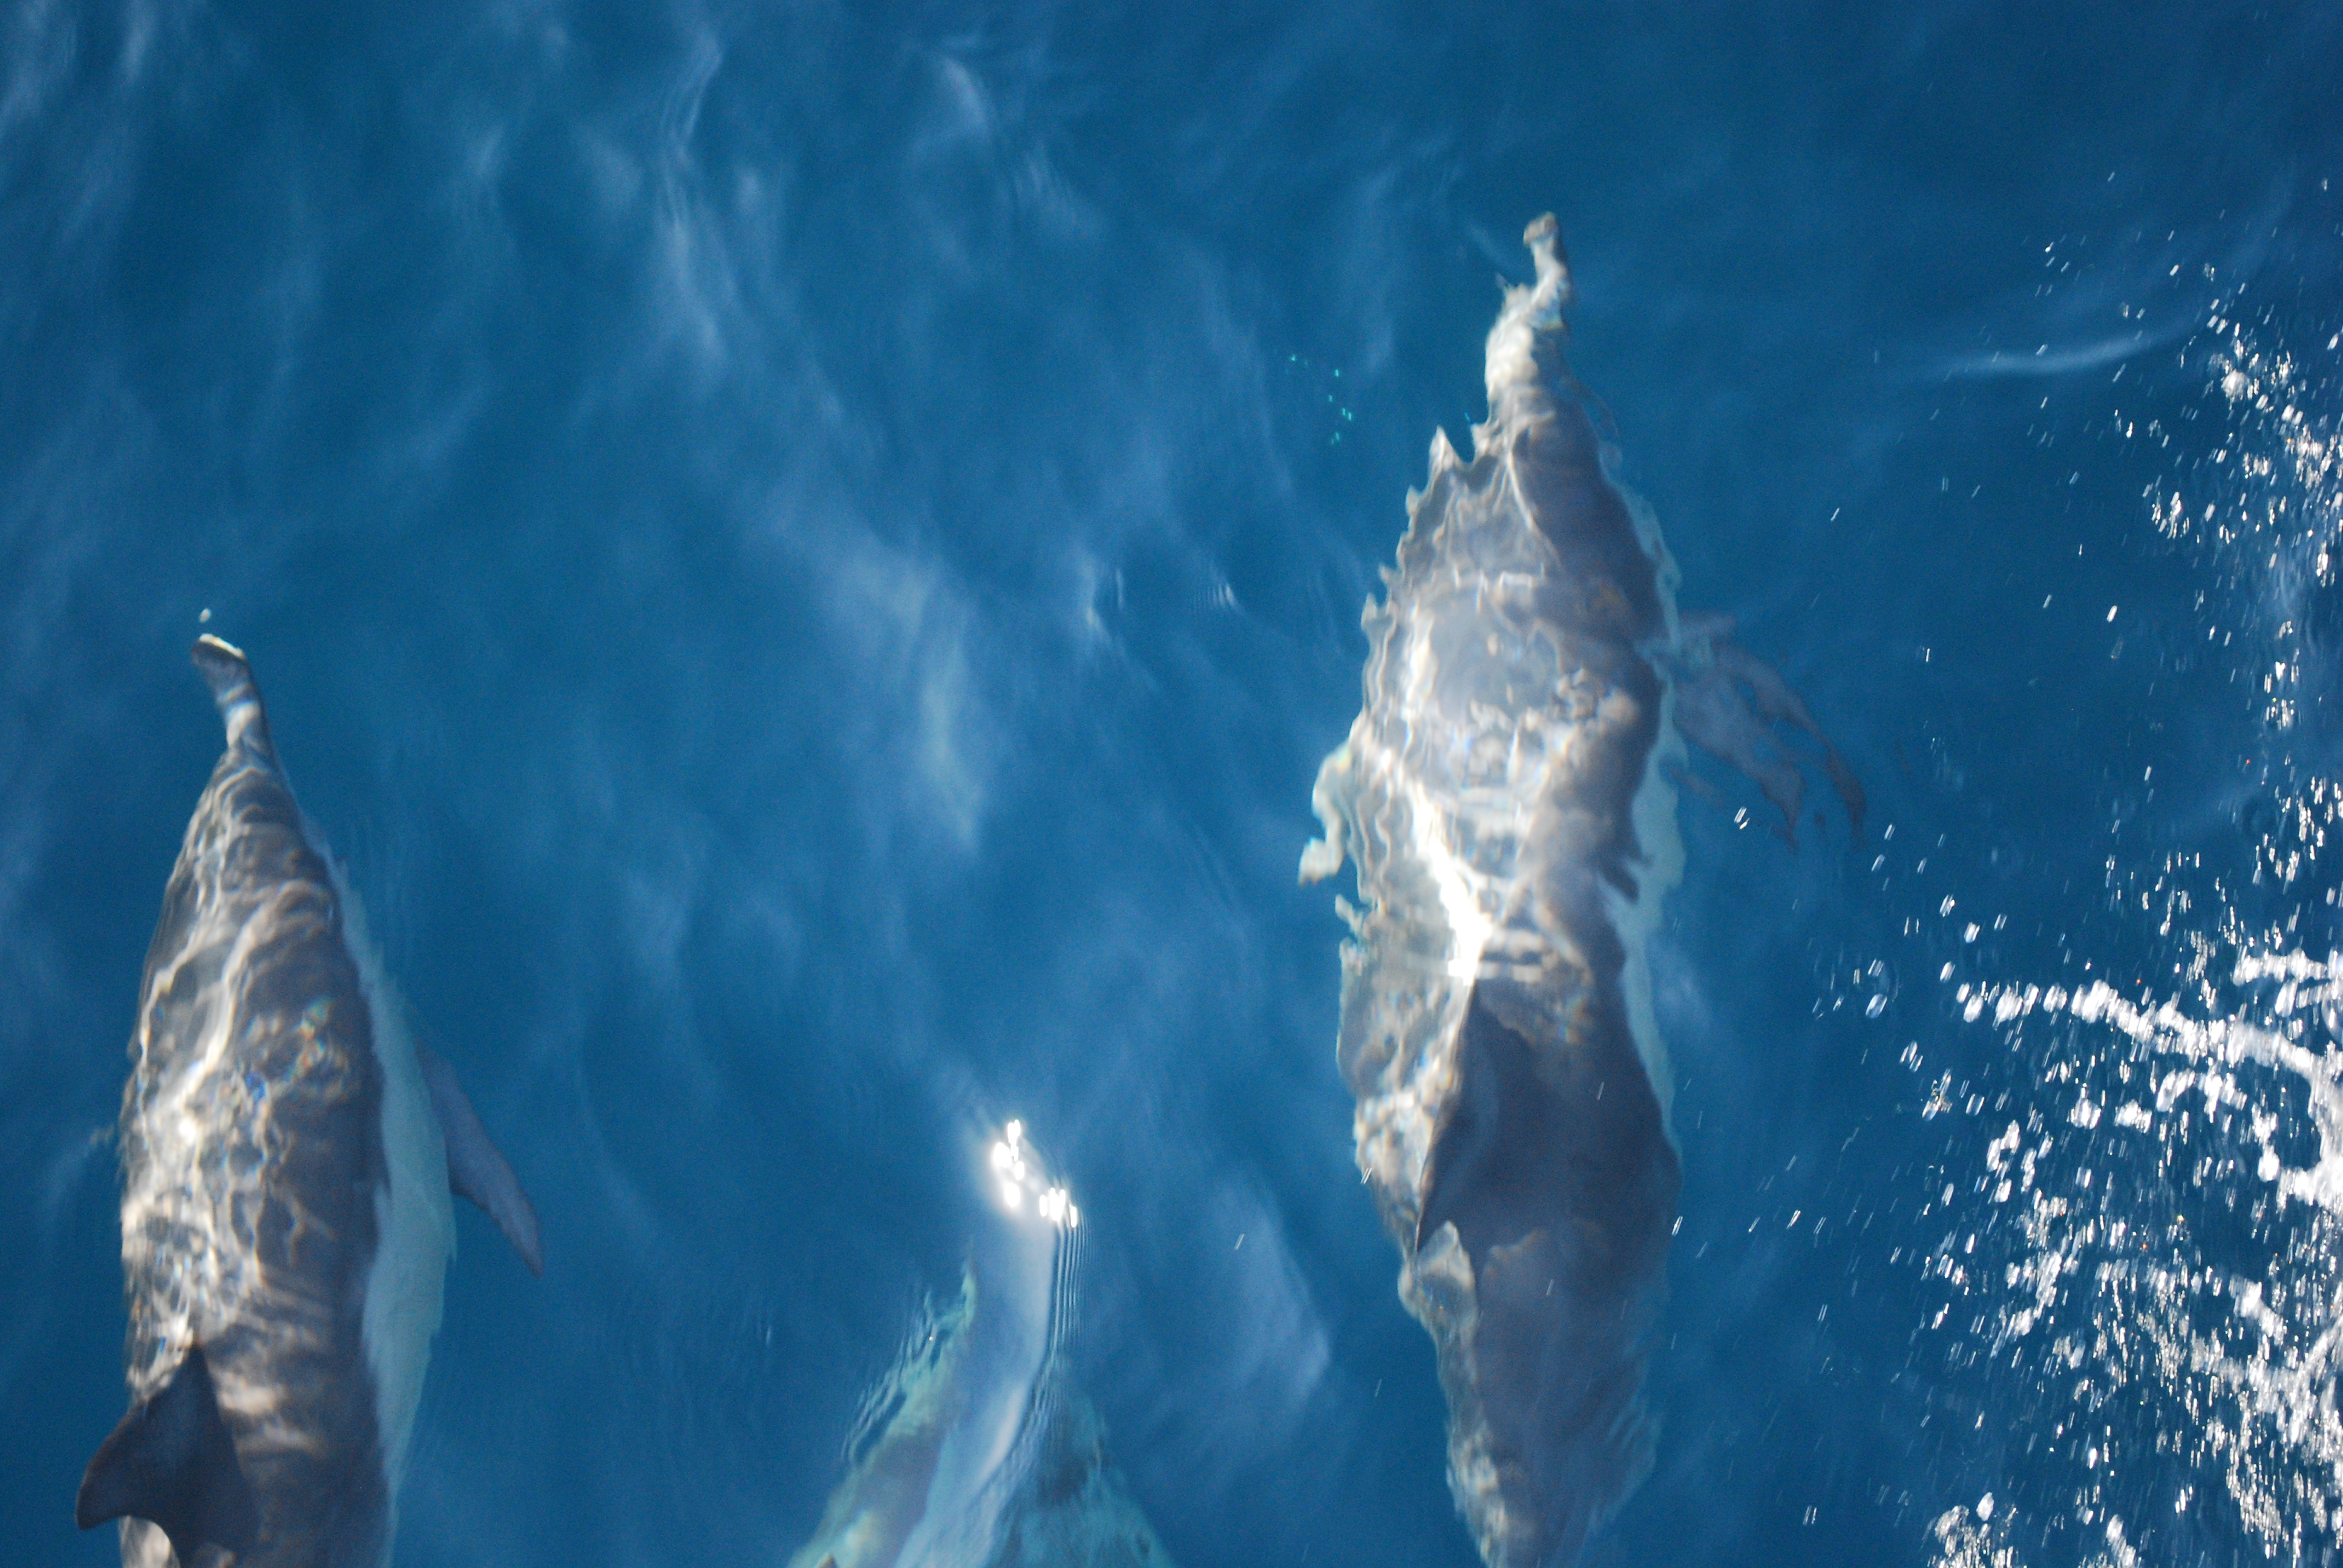 Common dolphins bow-riding